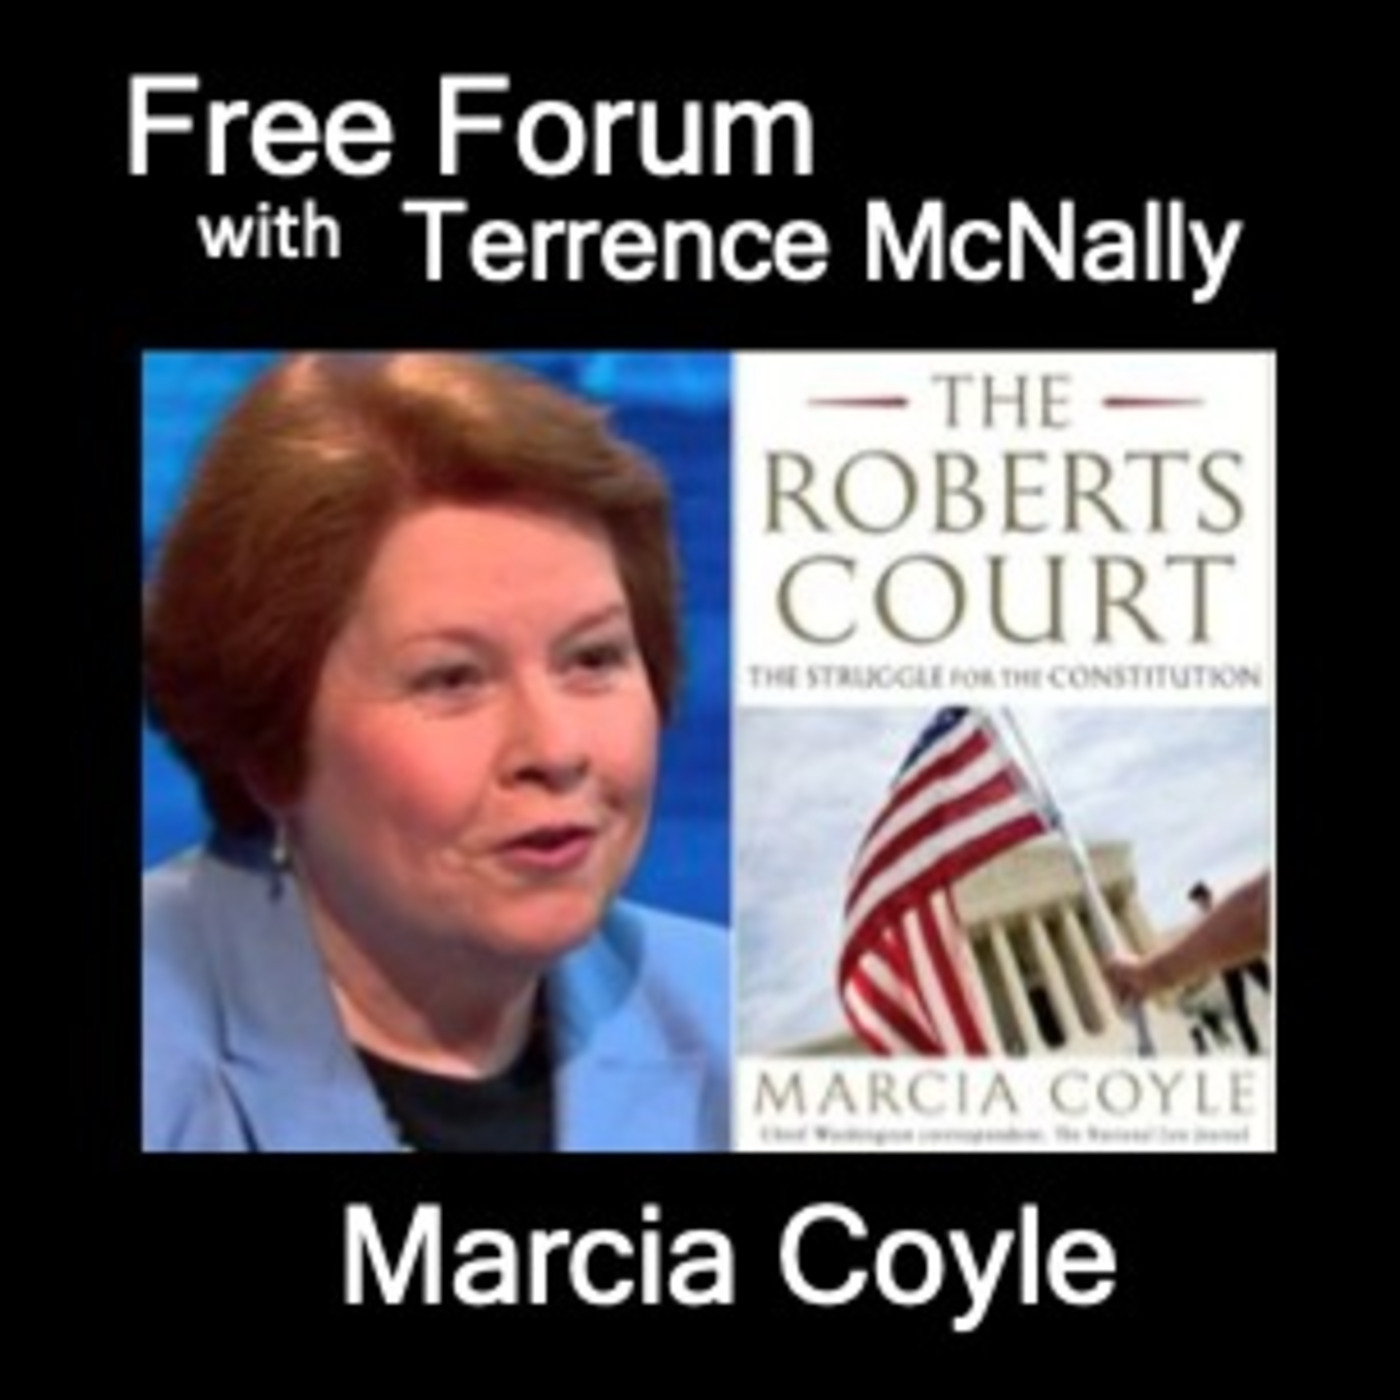 MARCIA COYLE on THE ROBERTS COURT (2013) - What shoiuld we expect with Roberts the new swing vote?